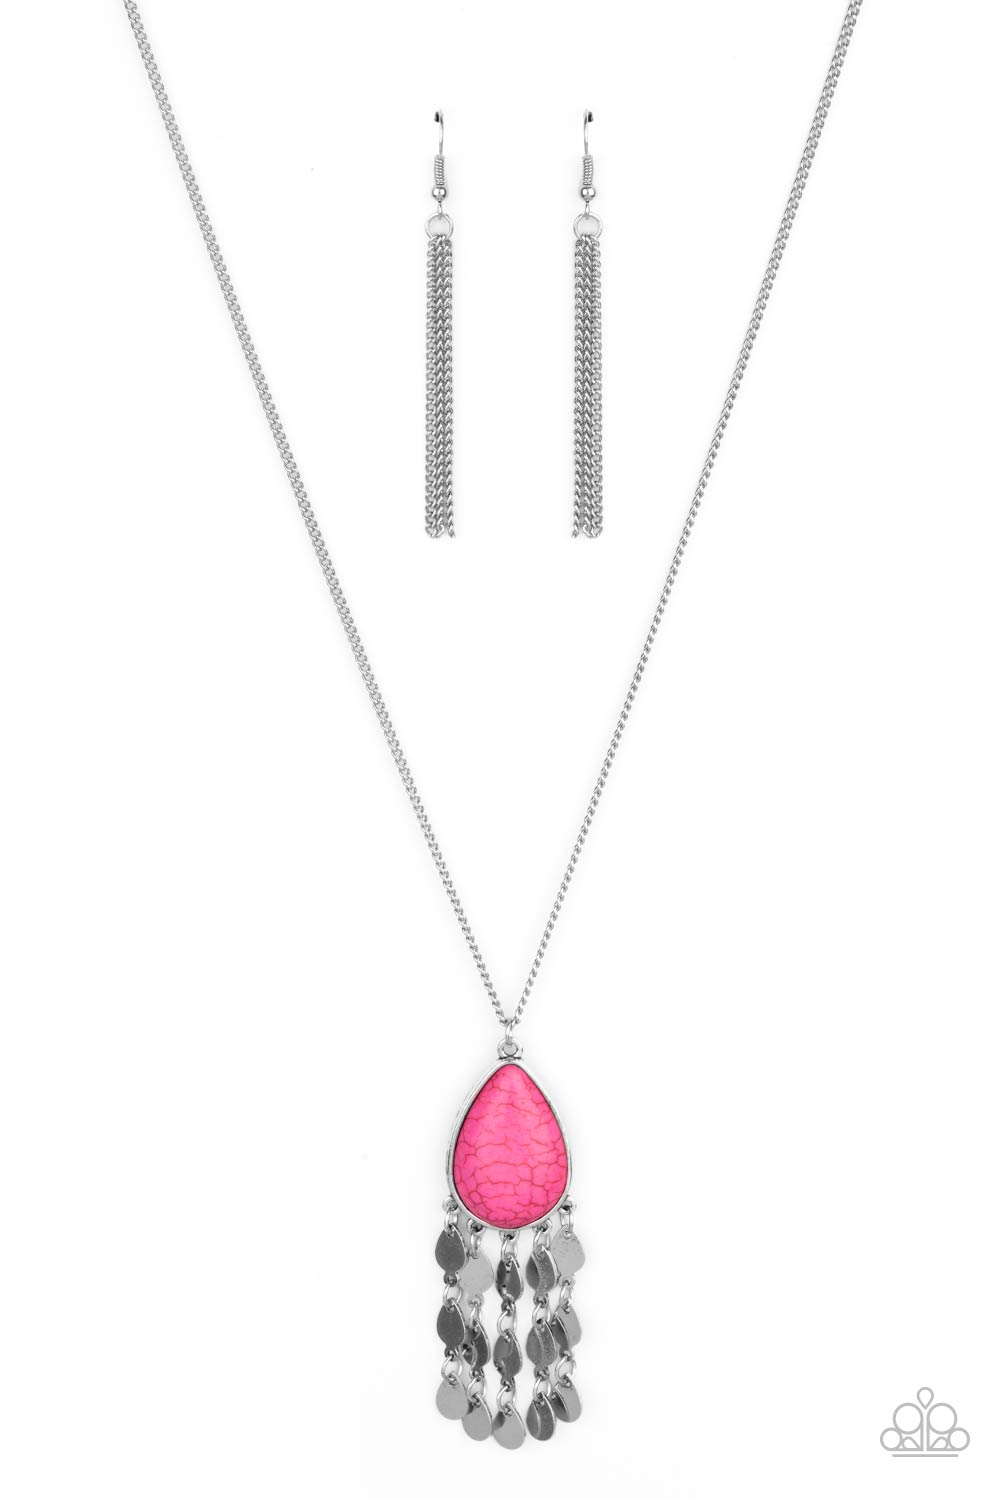 Necklace - Musically Mojave - Pink